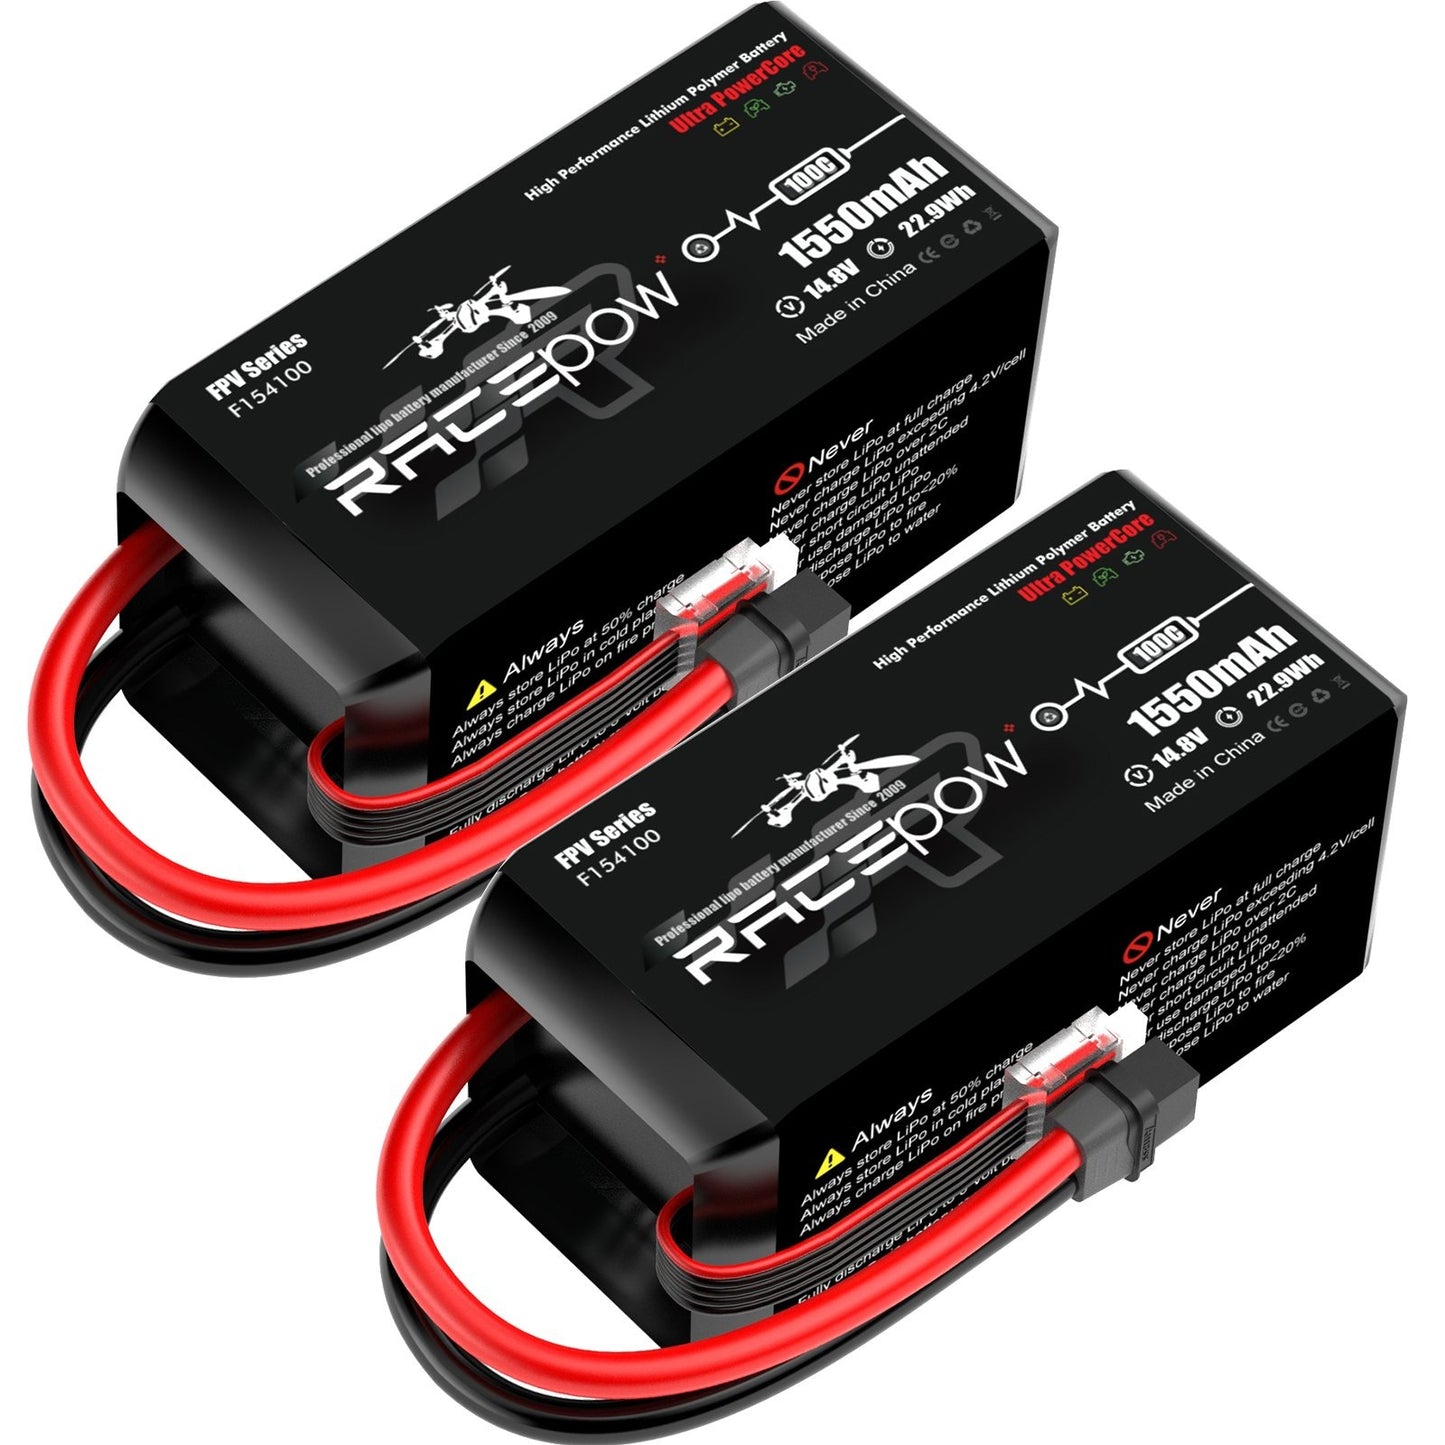 1550mAh 14.8V 100C 4S Lipo Battery Pack with XT60H Connector